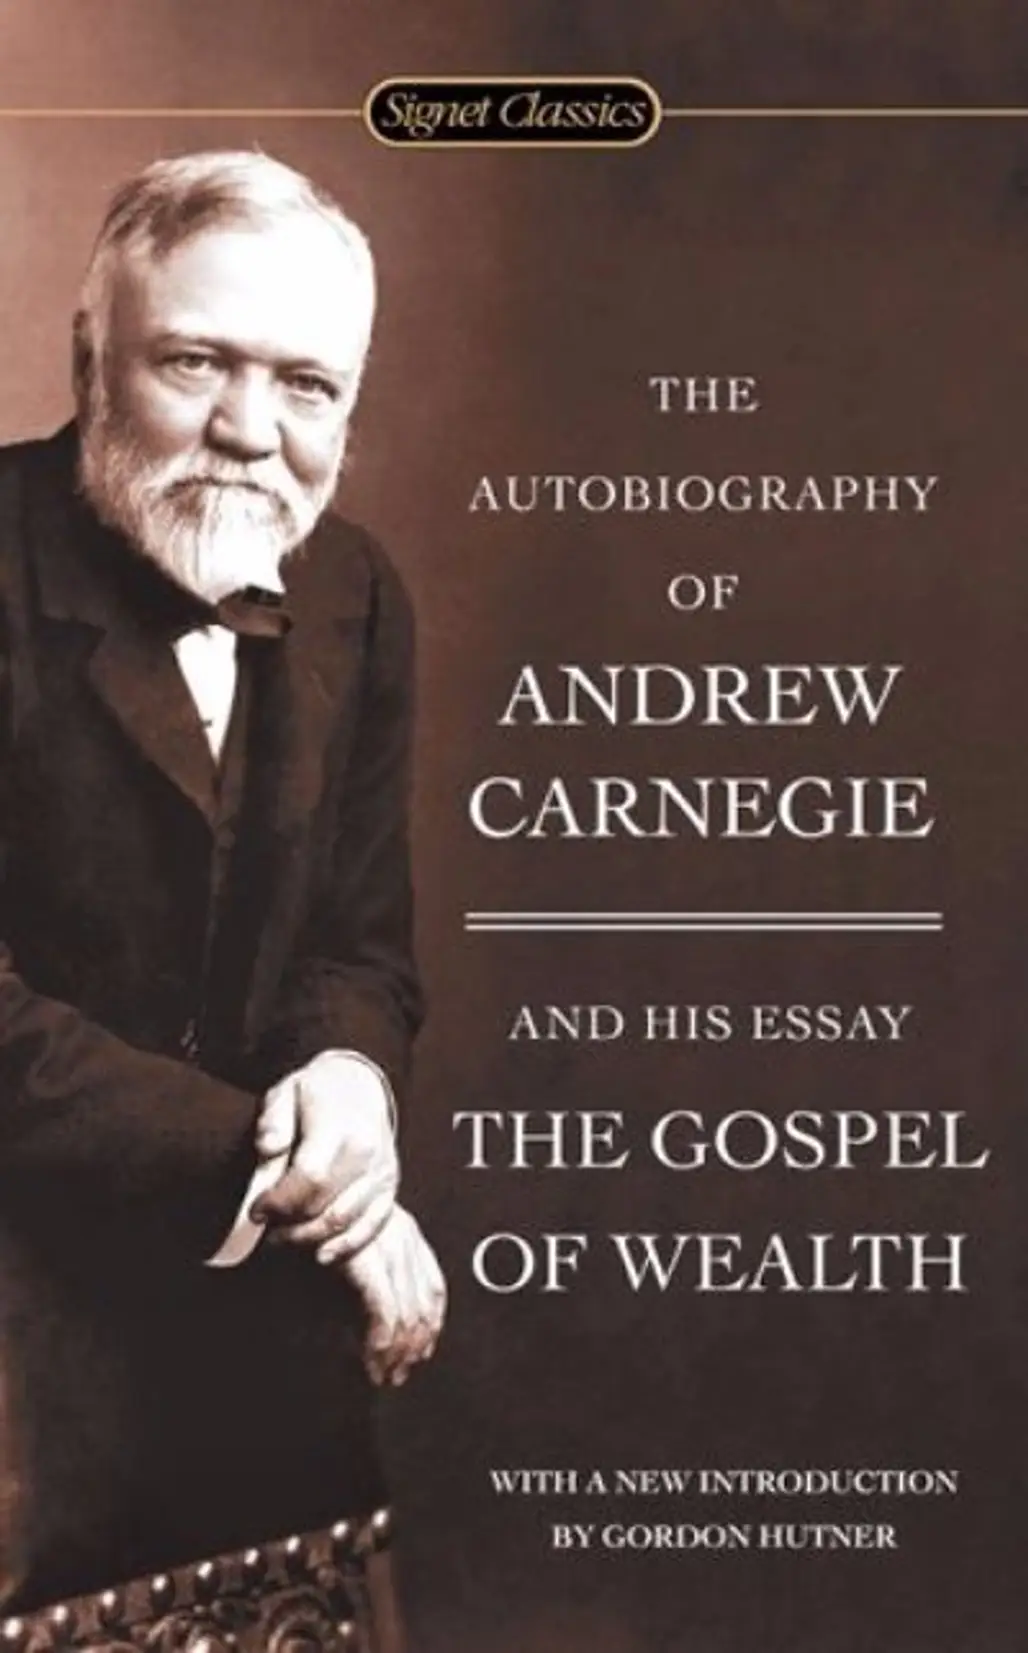 The Autobiography of Andrew Carnegie and the Gospel of Wealth – Andrew Carnegie